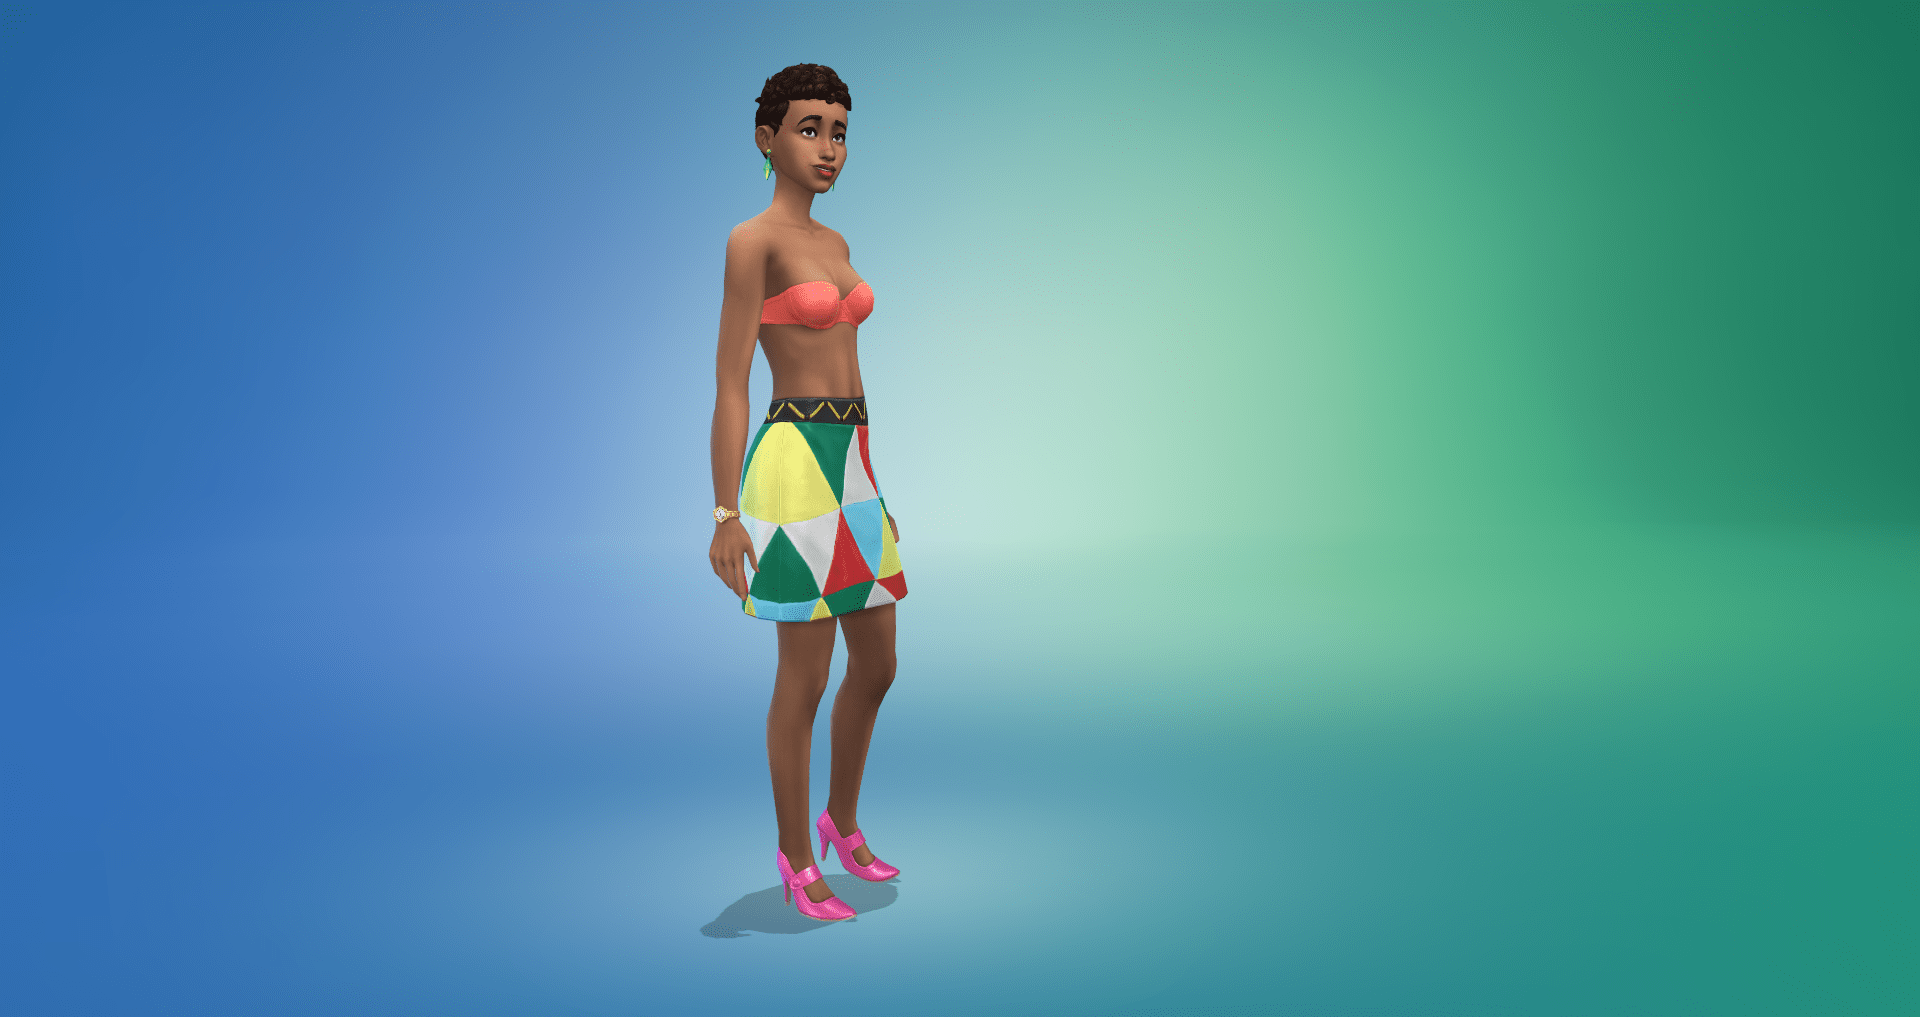 The Sims 4 Moschino Stuff Pack Review - BeyondSims